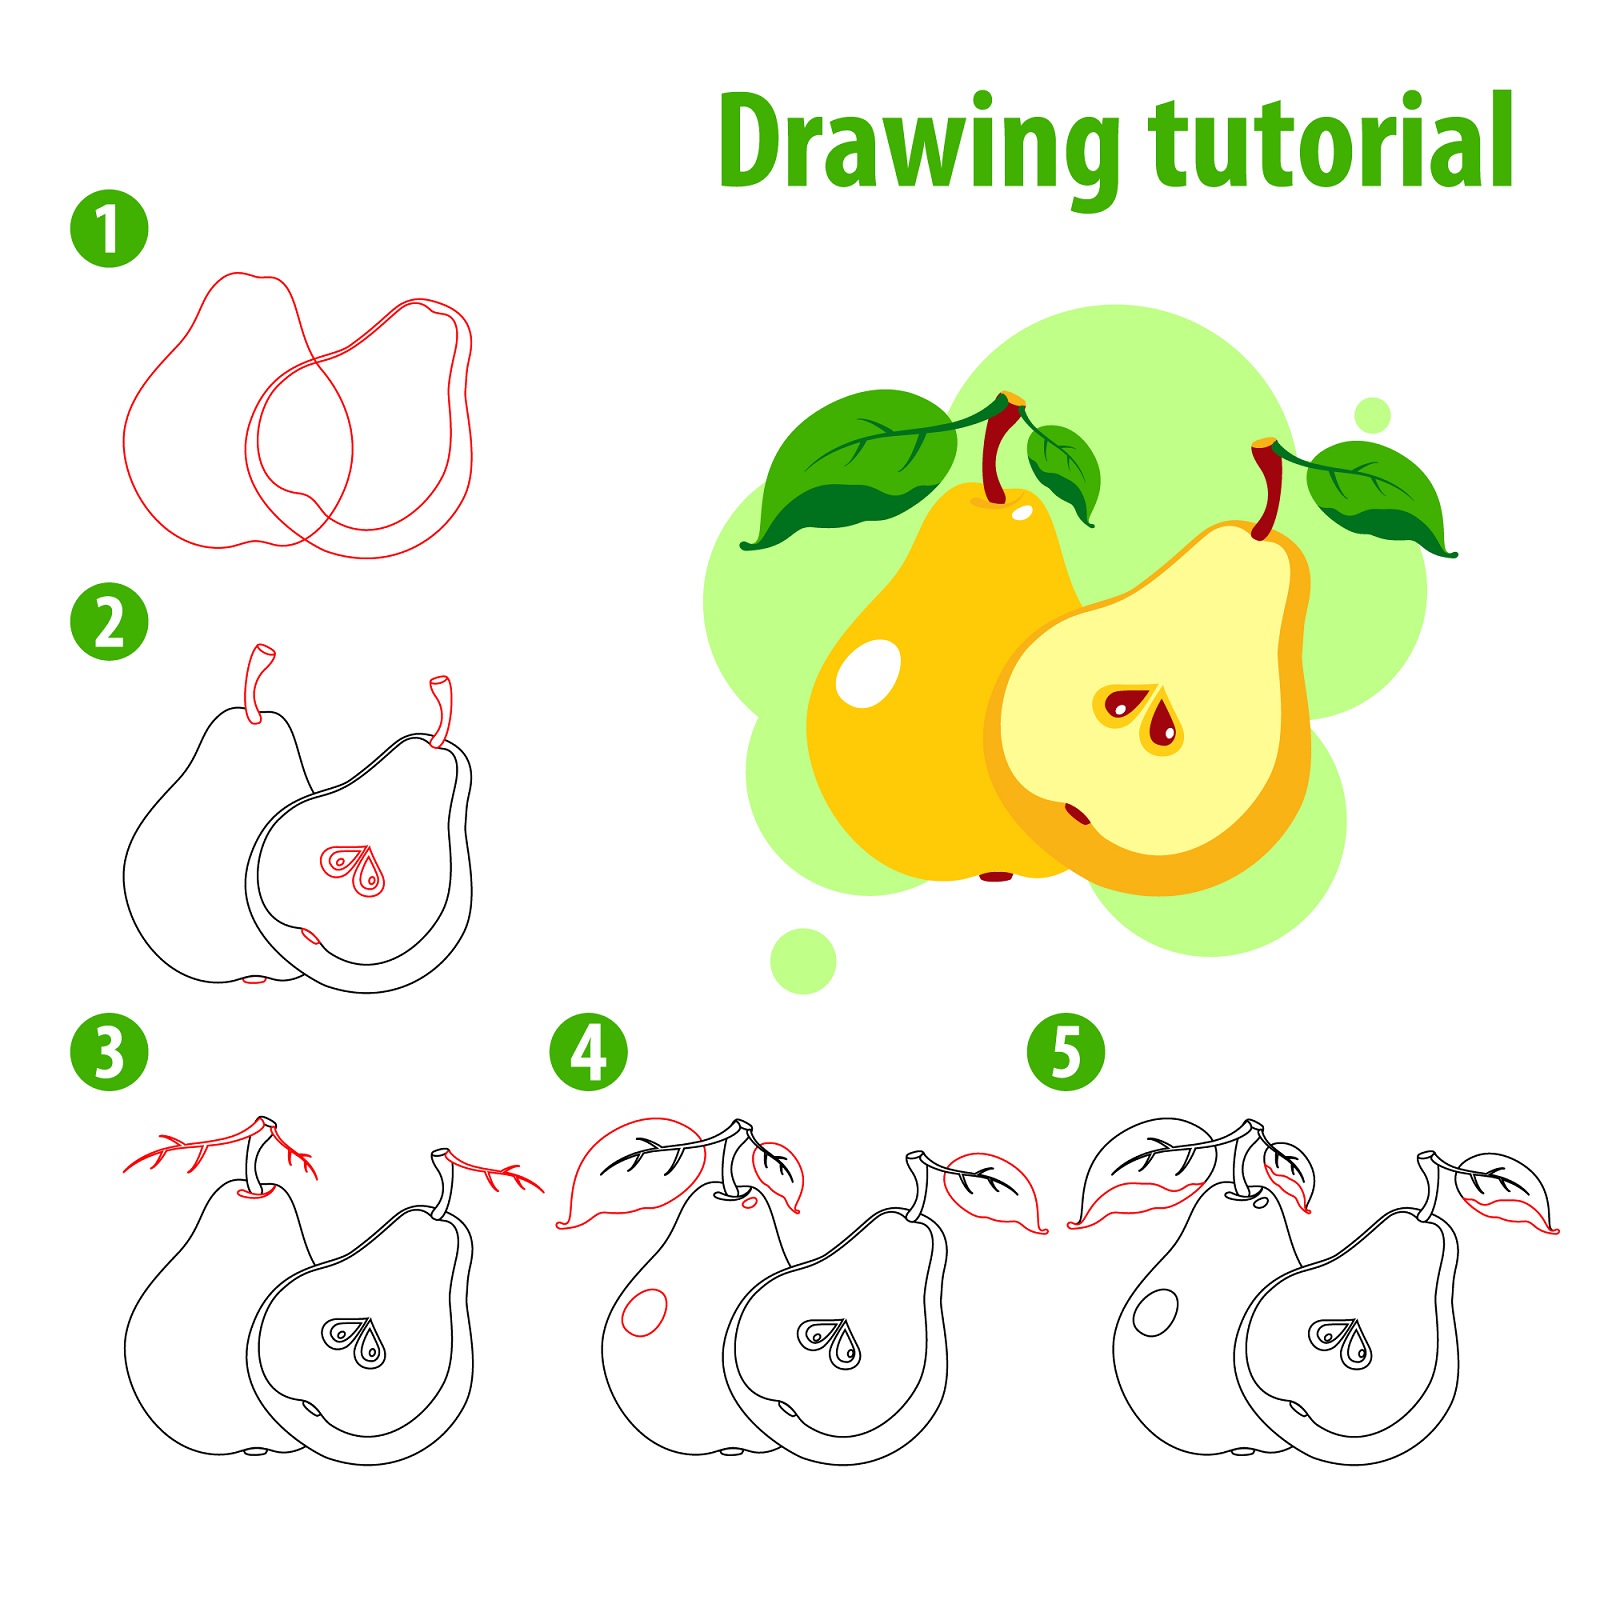 how to draw a pear step by step